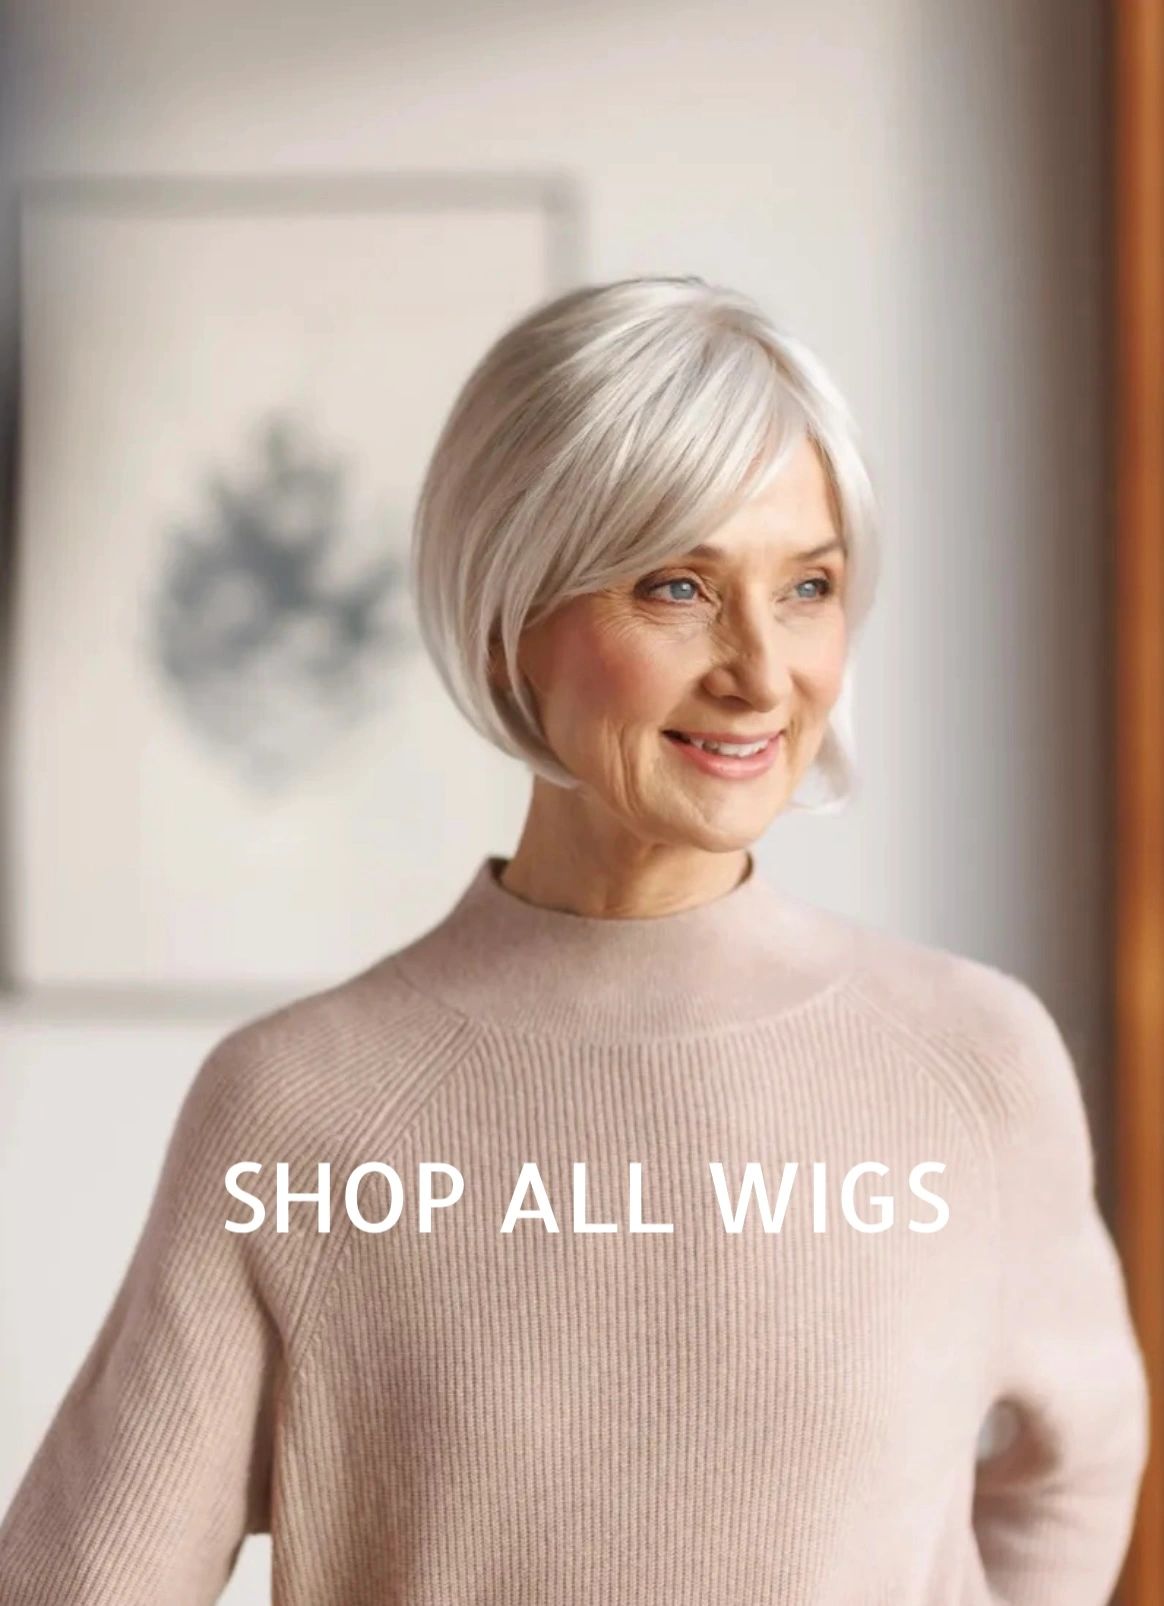 WIGS BY NICHOLAS is a small family owned business in London that is all about Local Service. However